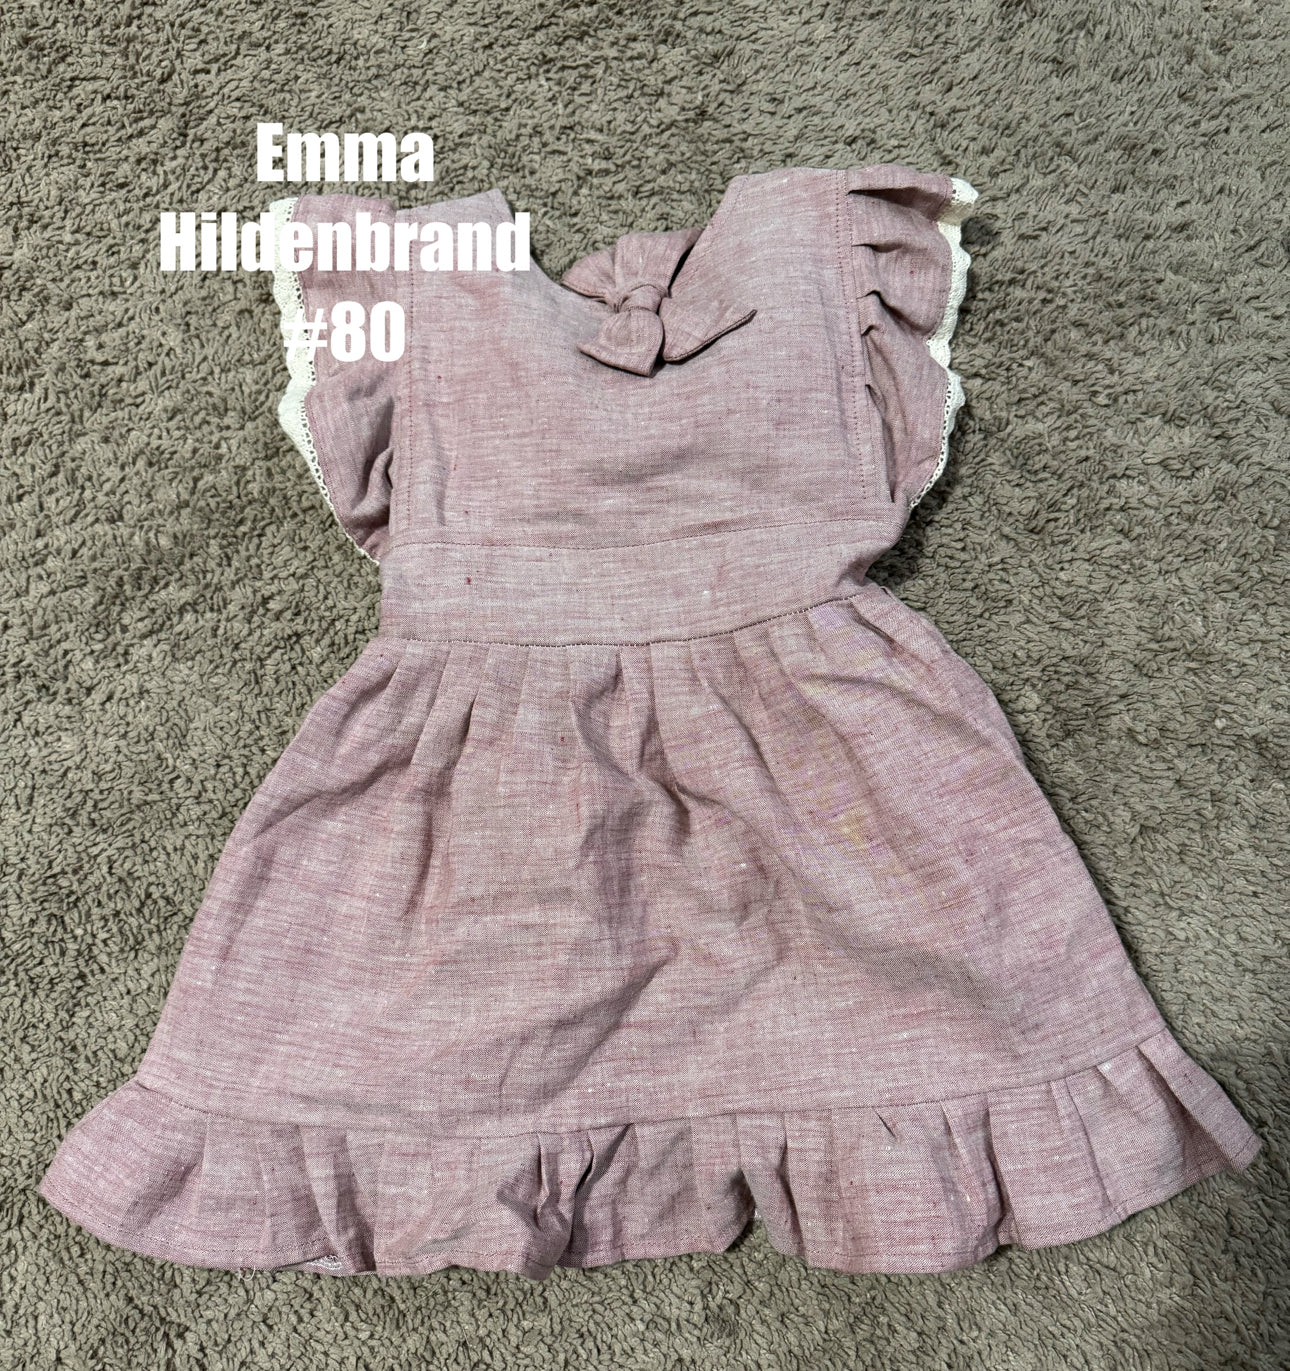 REDUCED Gorgeous Girls Dress Fits Like 2T-3T